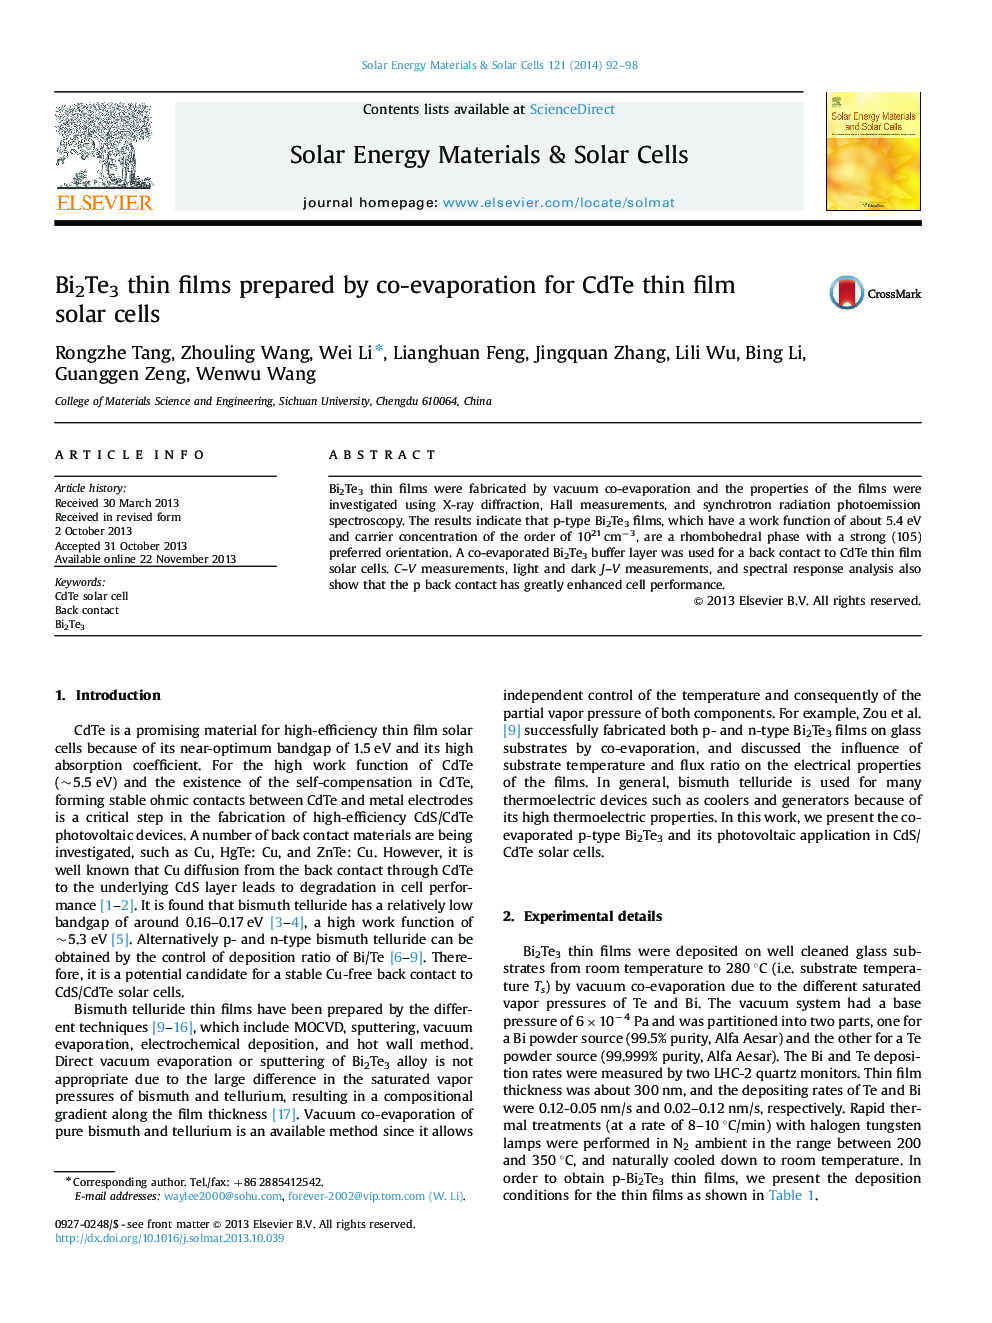 Bi2Te3 thin films prepared by co-evaporation for CdTe thin film solar cells